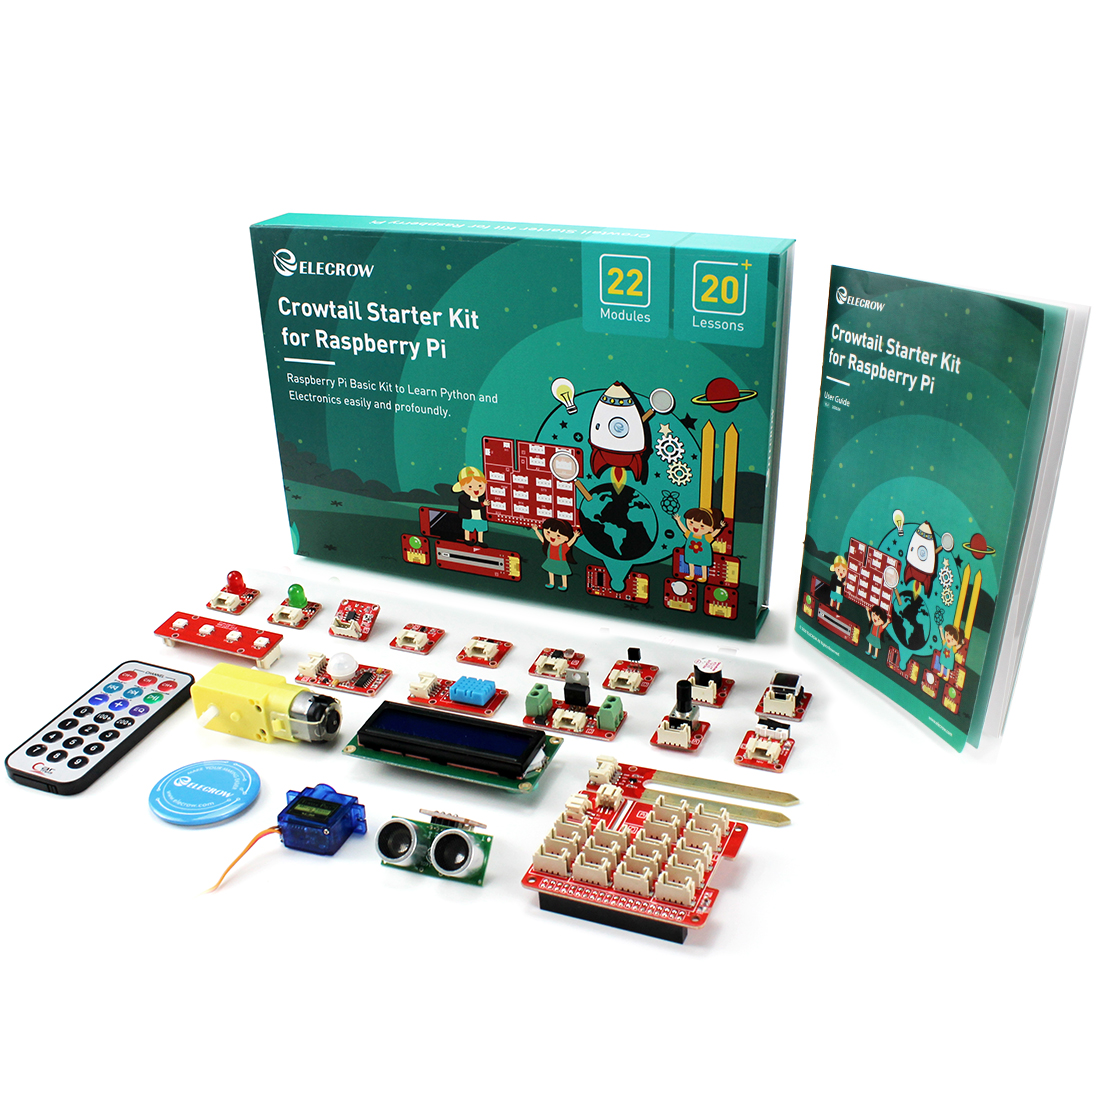 New Product Release - Crowtail Starter Kit for Raspberry Pi